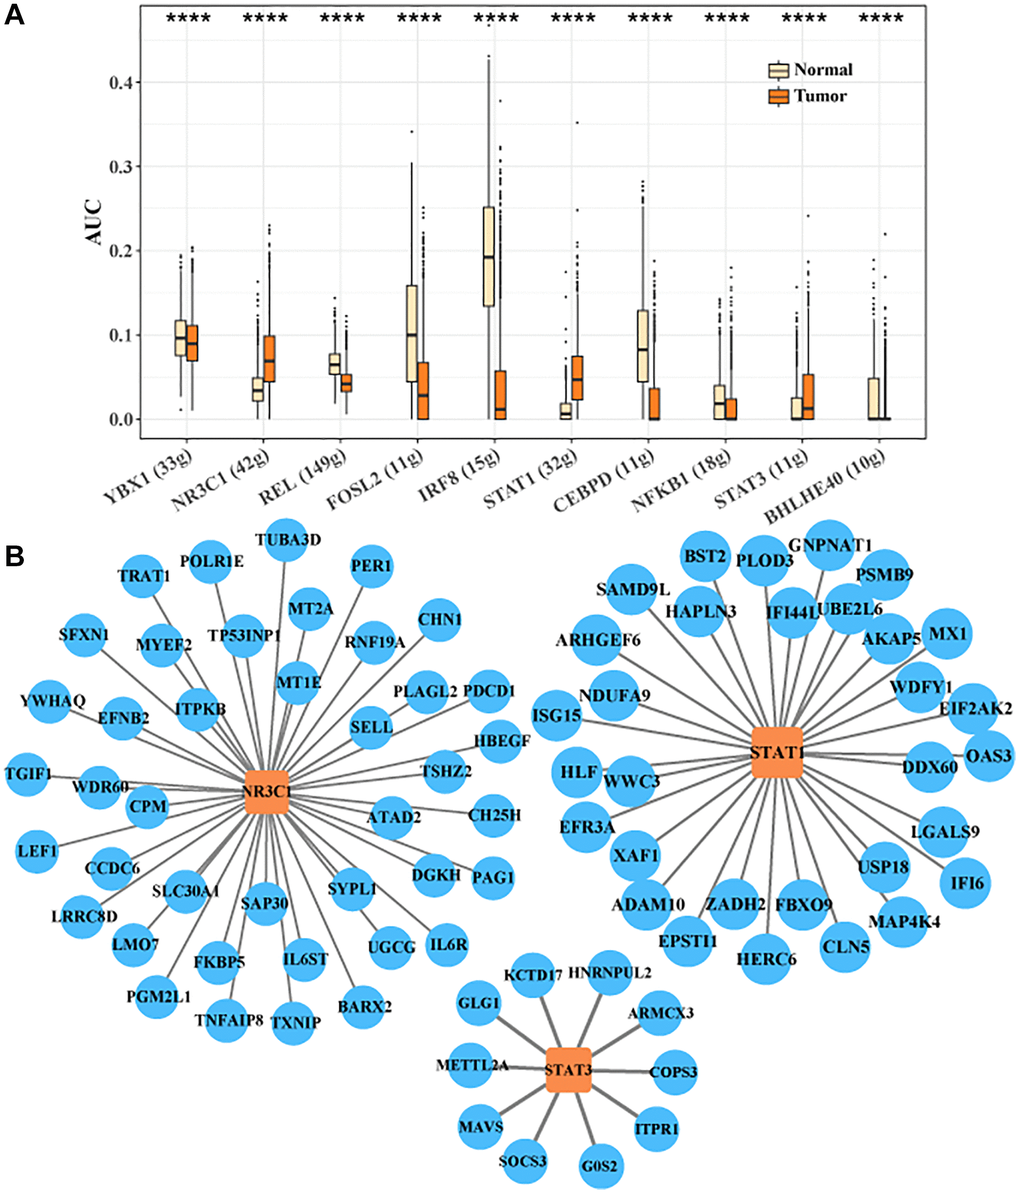 Transcription factor regulatory network in CTLA4+ T cells. (A) Important transcription factors in CTLA4+ T cells identified by SCENIC analysis. (B) Network of target genes regulated by NR3C1, STAT1 and STAT3.